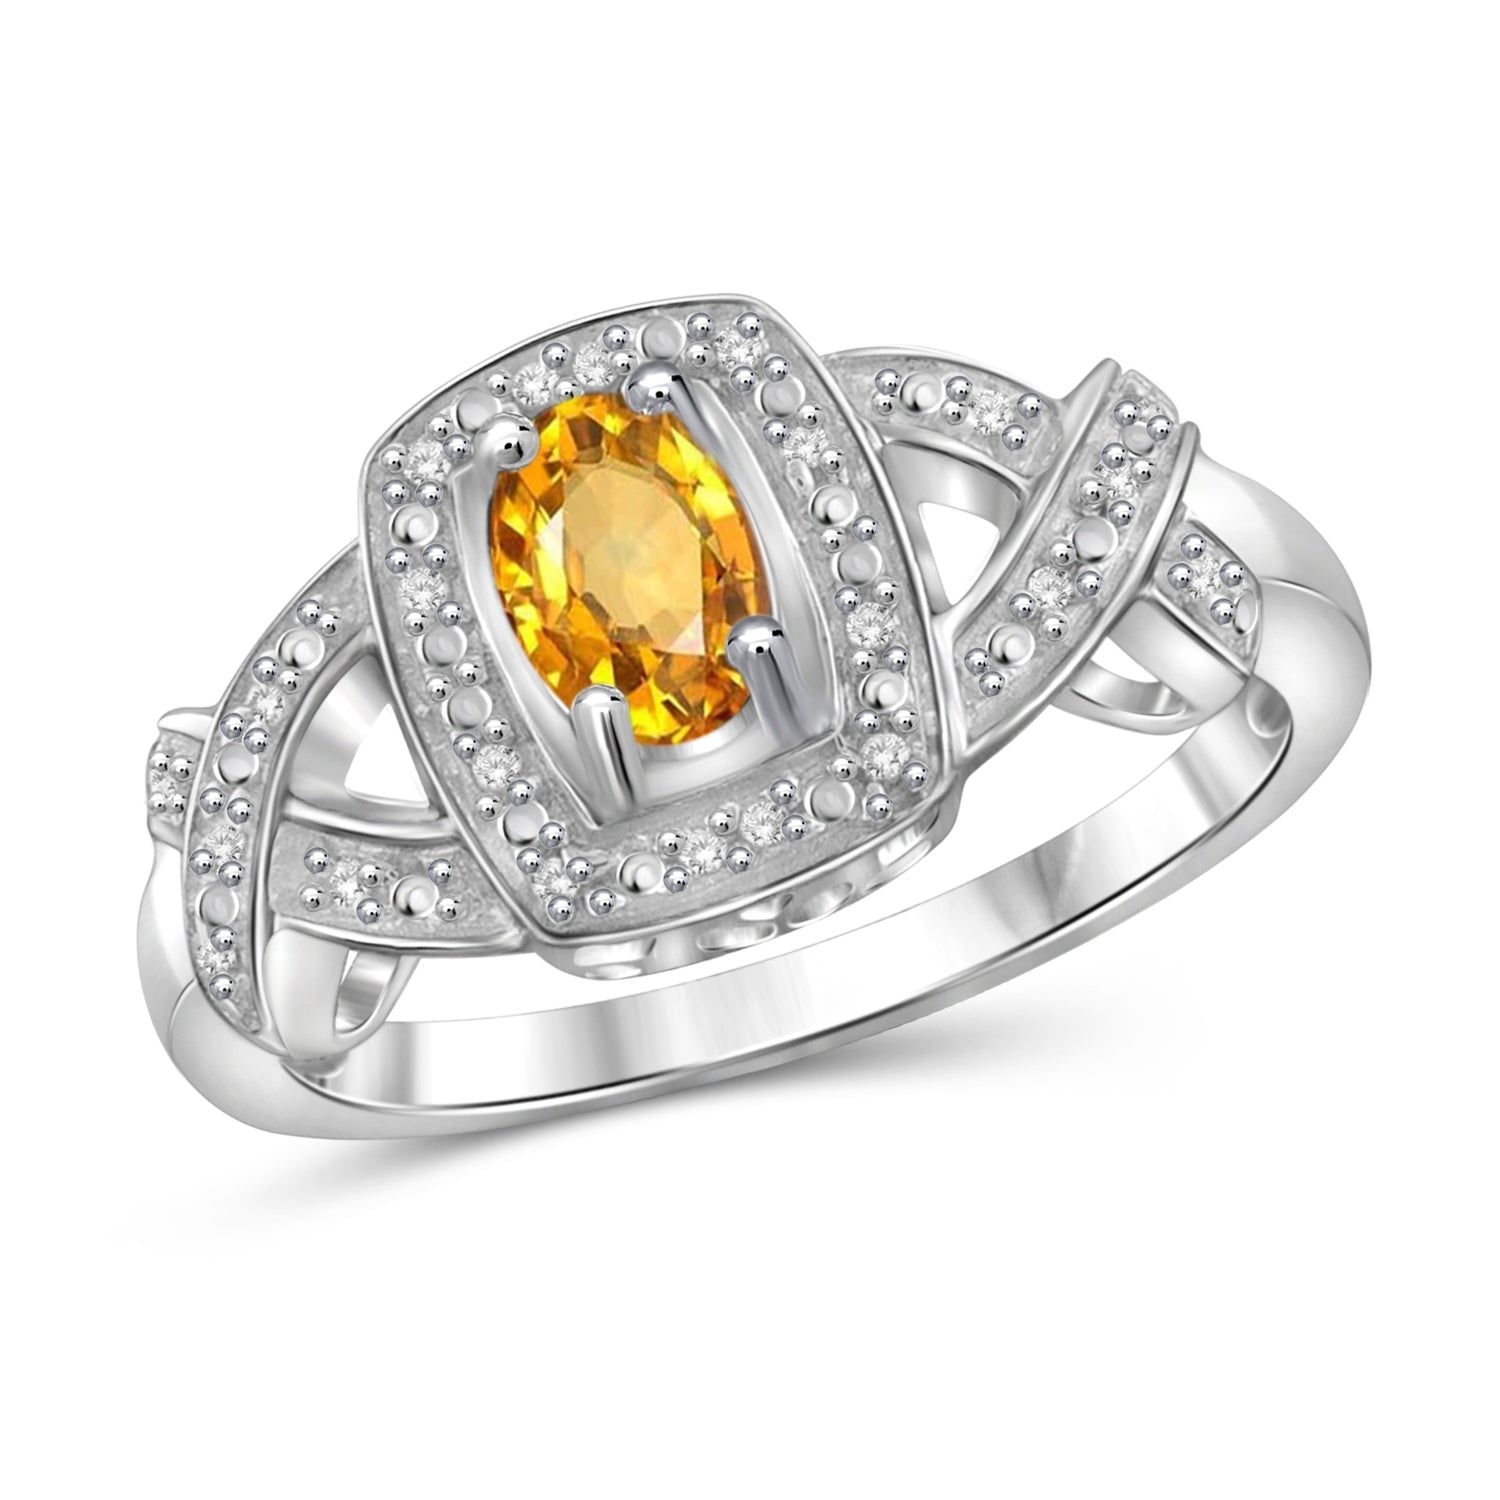 1/2 Carat T.G.W. Citrine And 1/20 Carat T.W. White Diamond Sterling Silver Ring